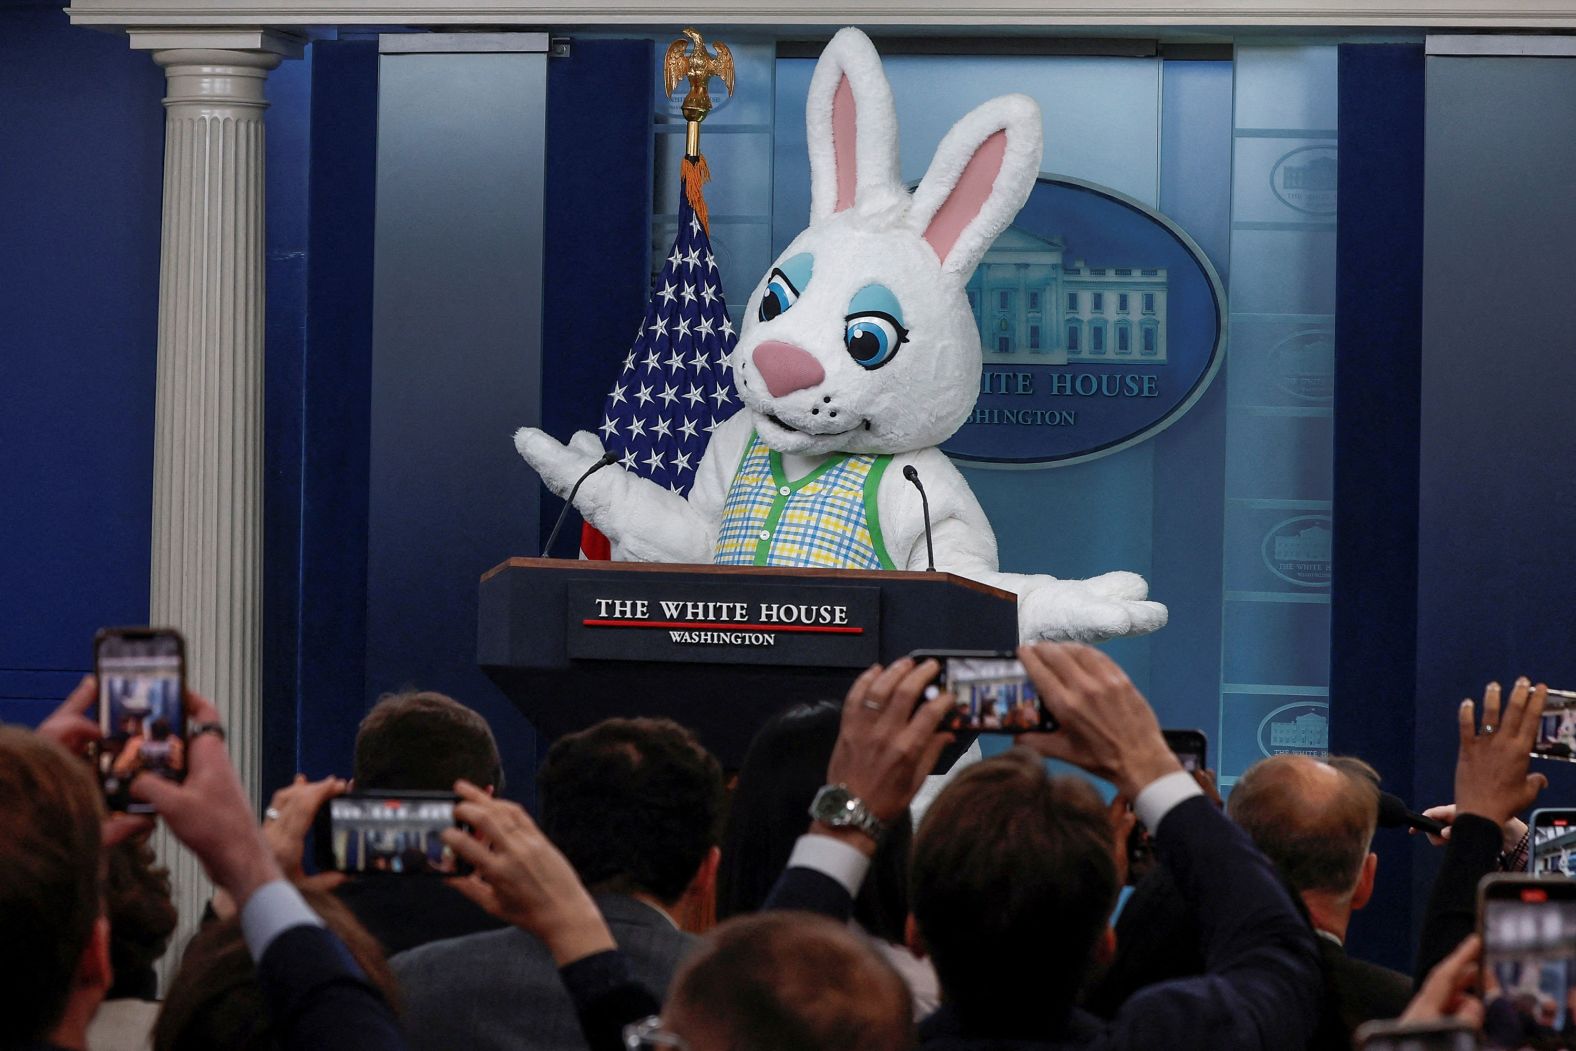 The Easter Bunny makes a guest appearance in the White House briefing room in Washington, DC, on Monday, April 1.